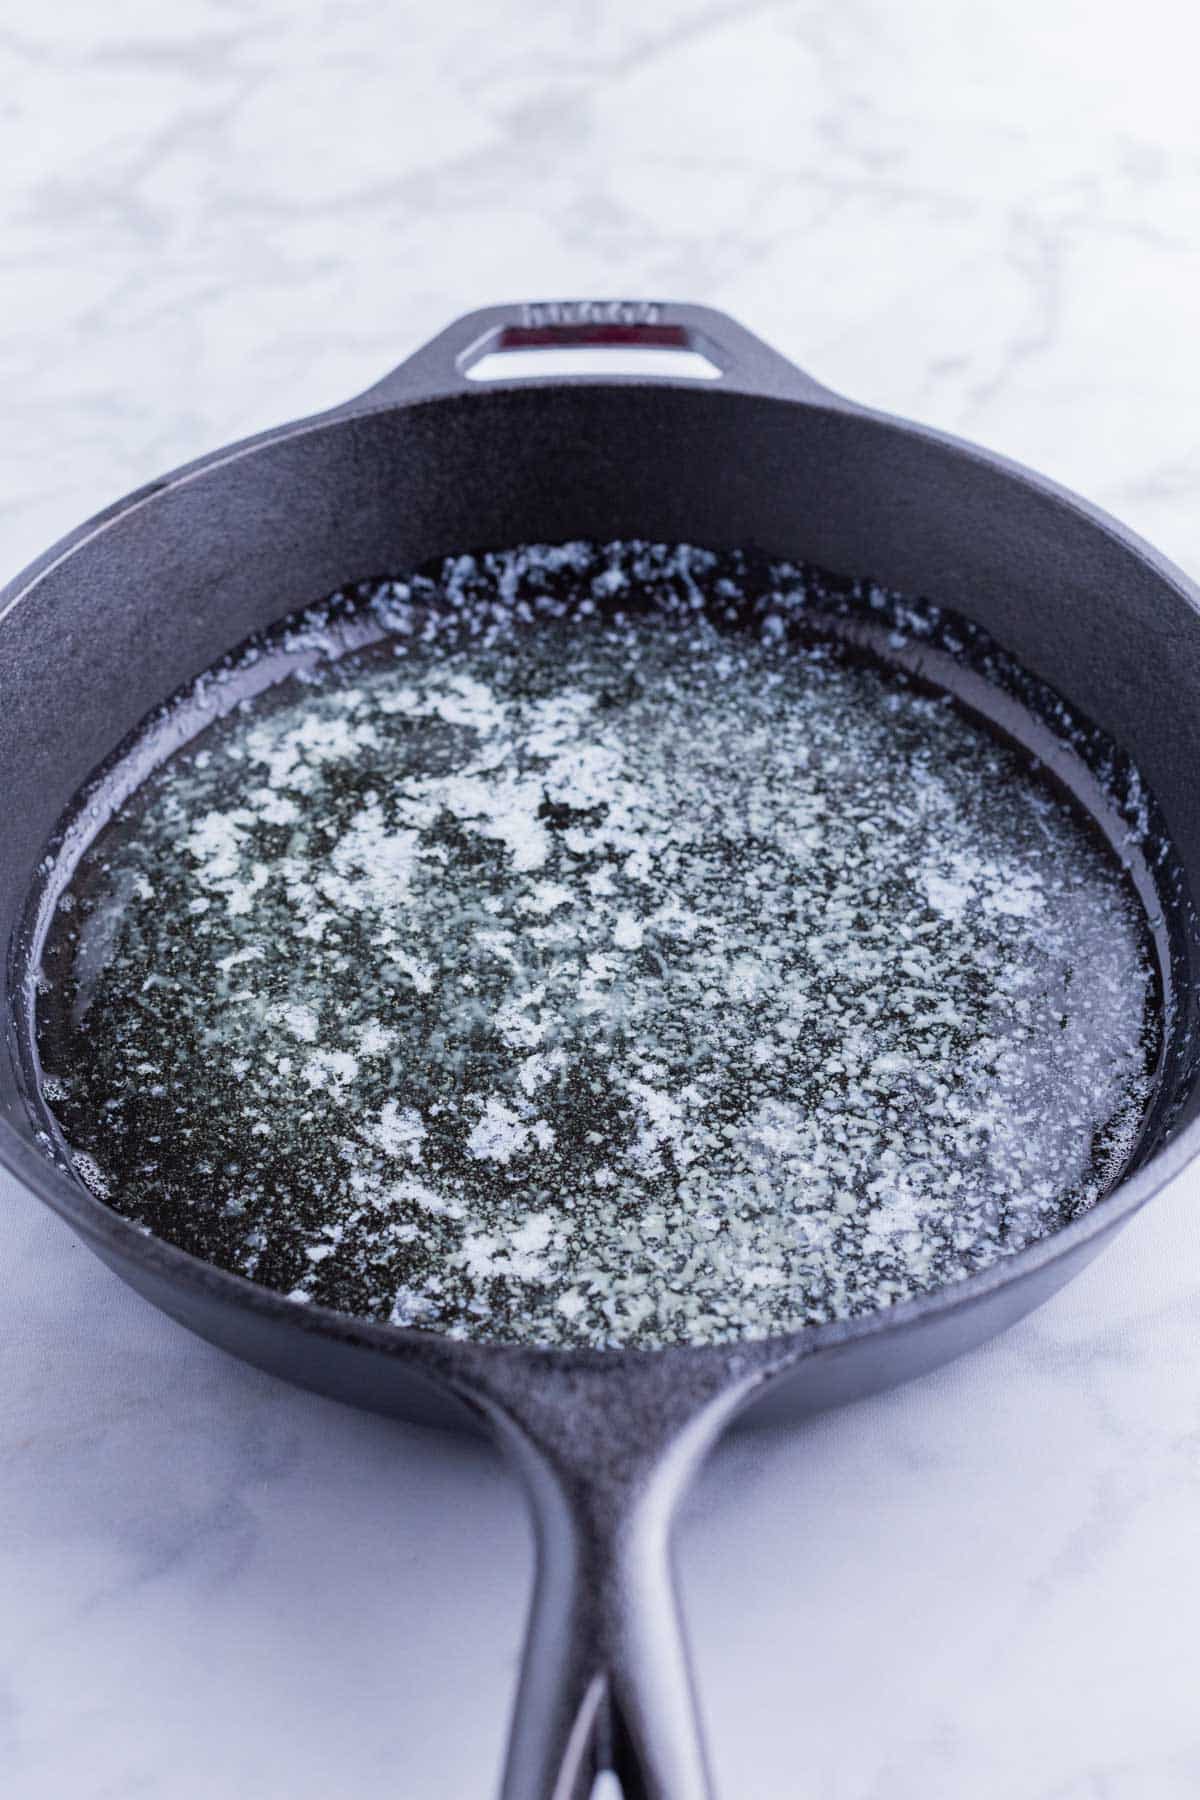 The butter is melted in a hot skillet in the oven.